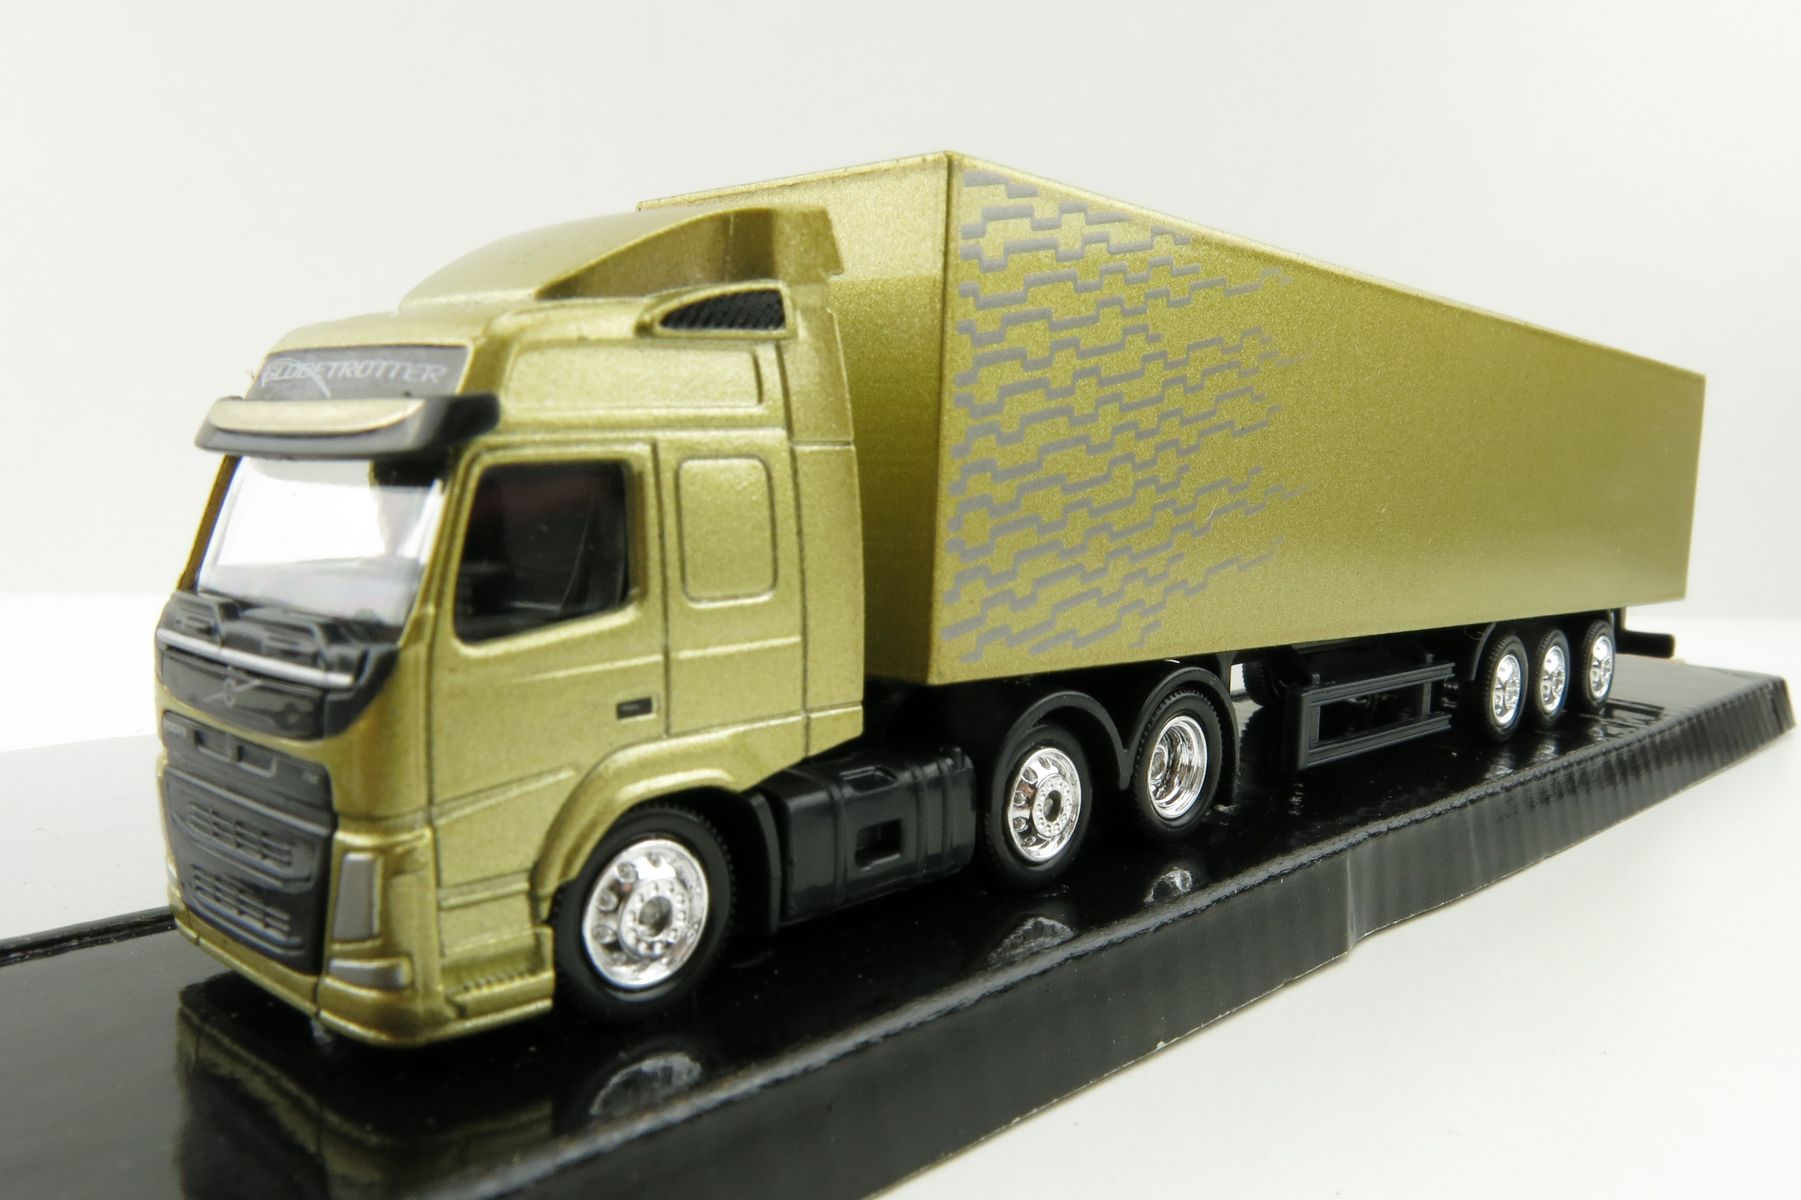 Product Image - Motorart 300042 - Volvo FM 6x2 truck with Box Trailer Gold - Scale 1:87